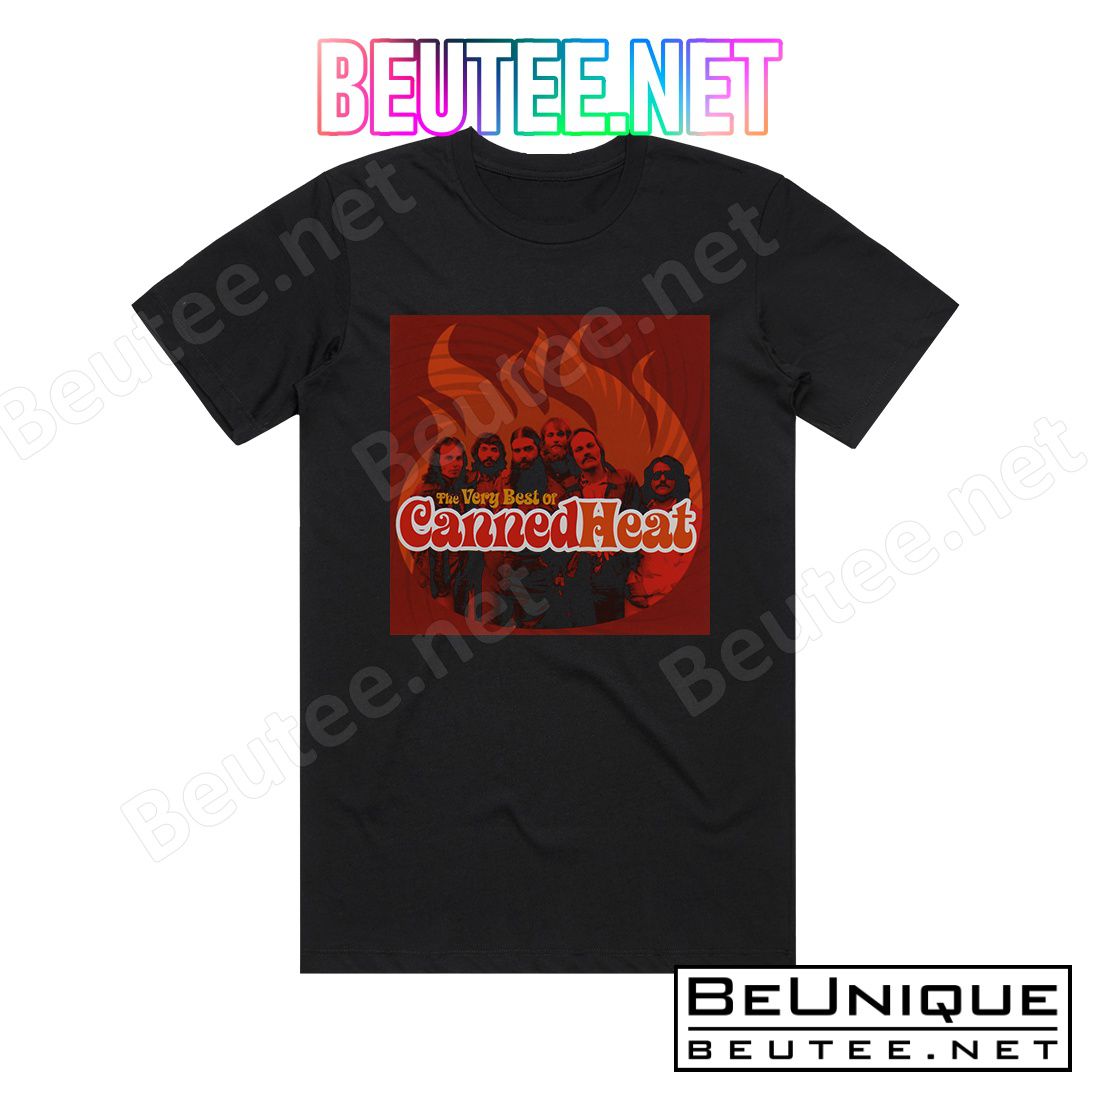 Canned Heat The Very Best Of Canned Heat Album Cover T-Shirt